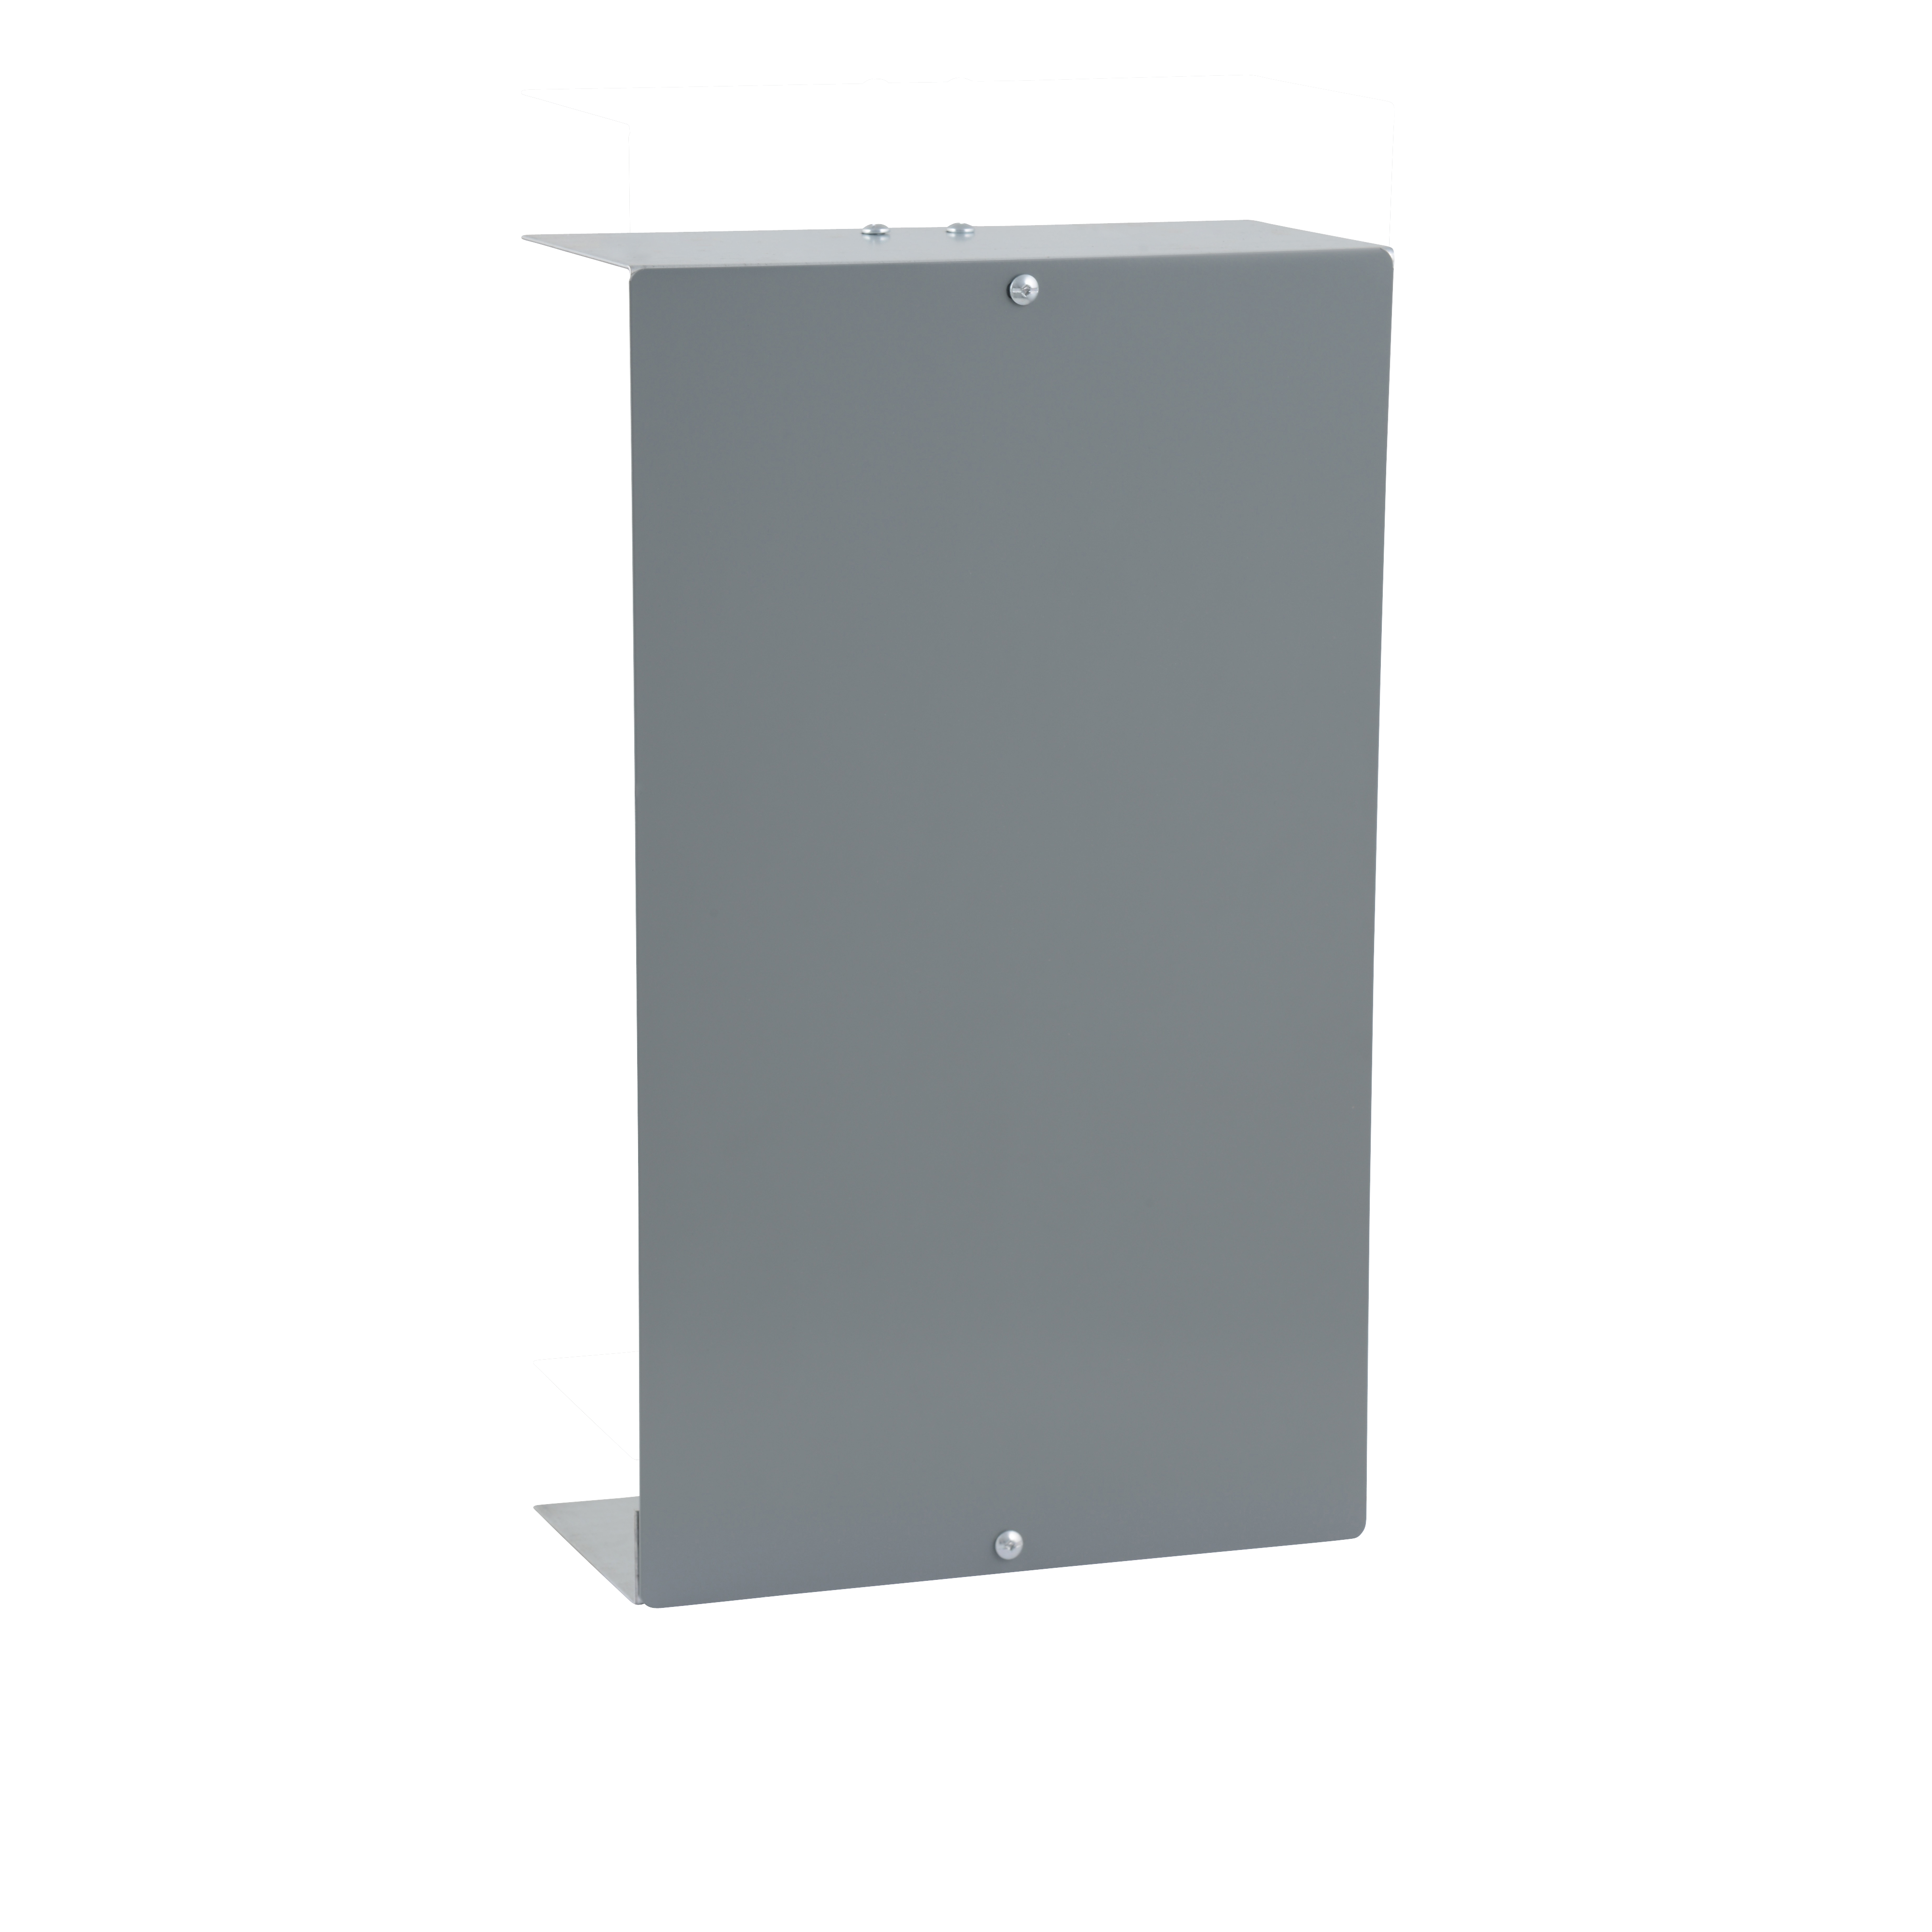 Enclosure Panel Skirt Assem, NQNF, Type 1, 20x15x5.75in